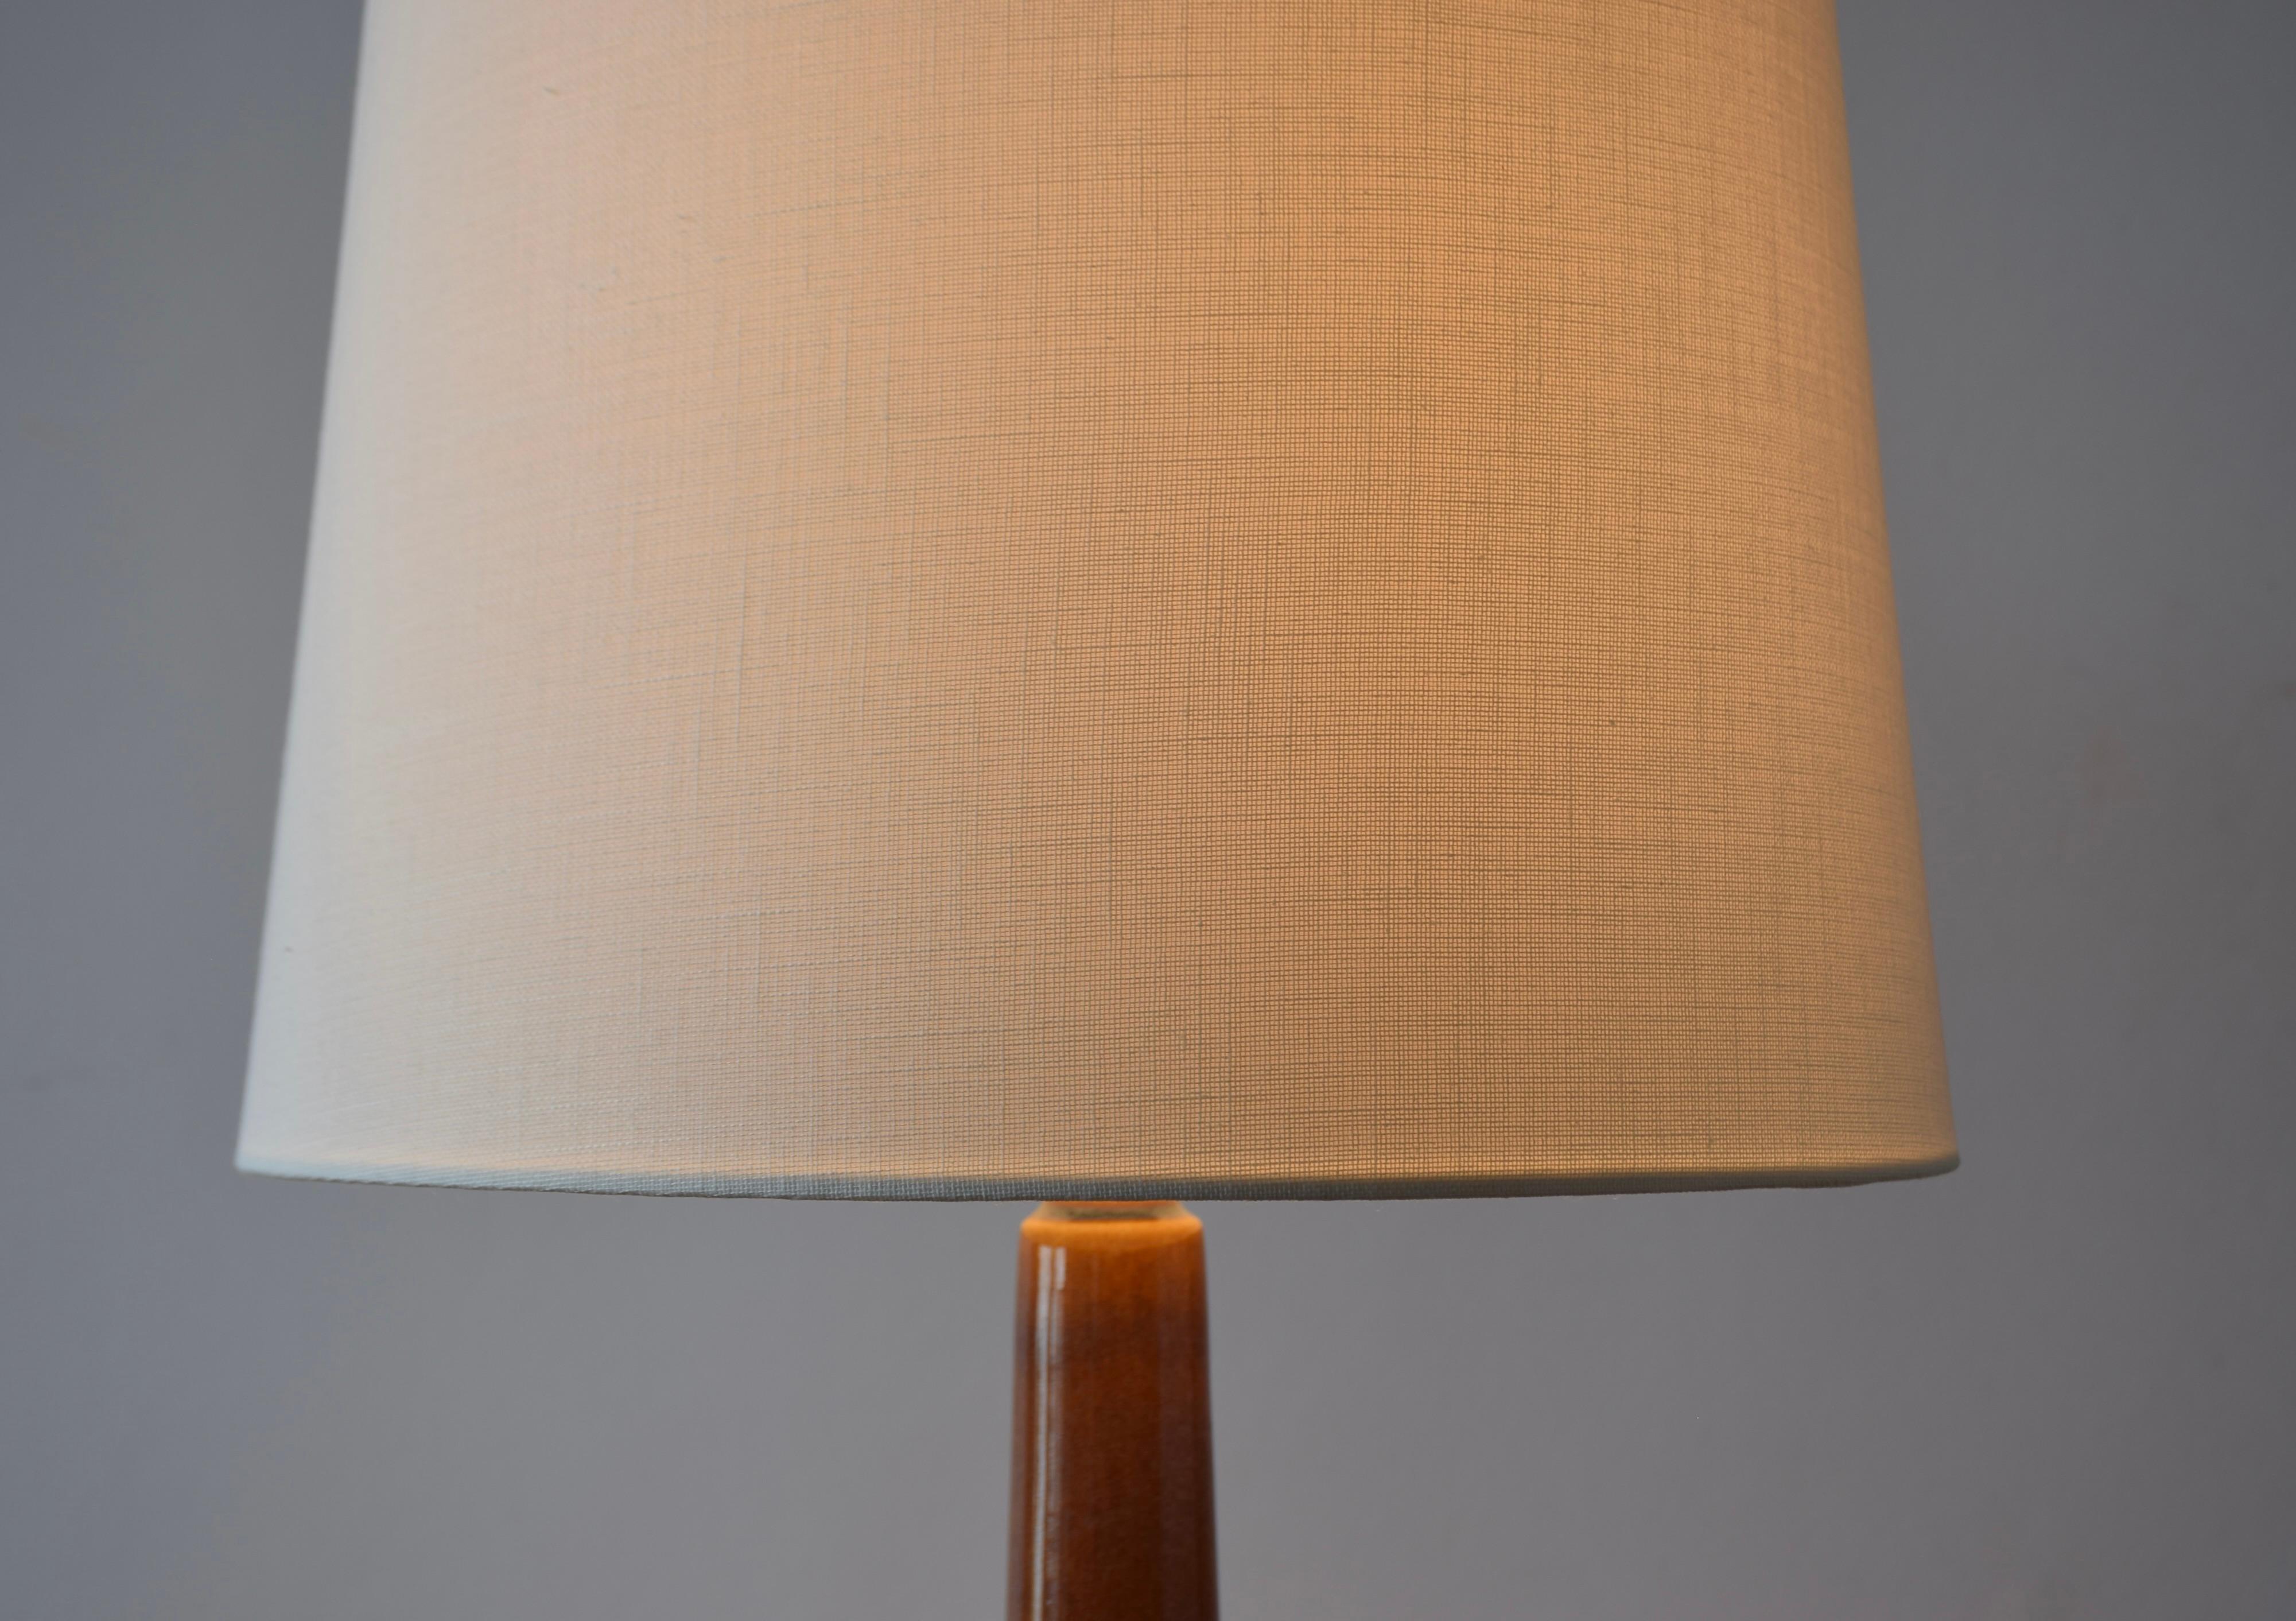 Tall Søholm Table Lamp with Blue Brown Glaze, Danish Modern Ligthing 1960s For Sale 6